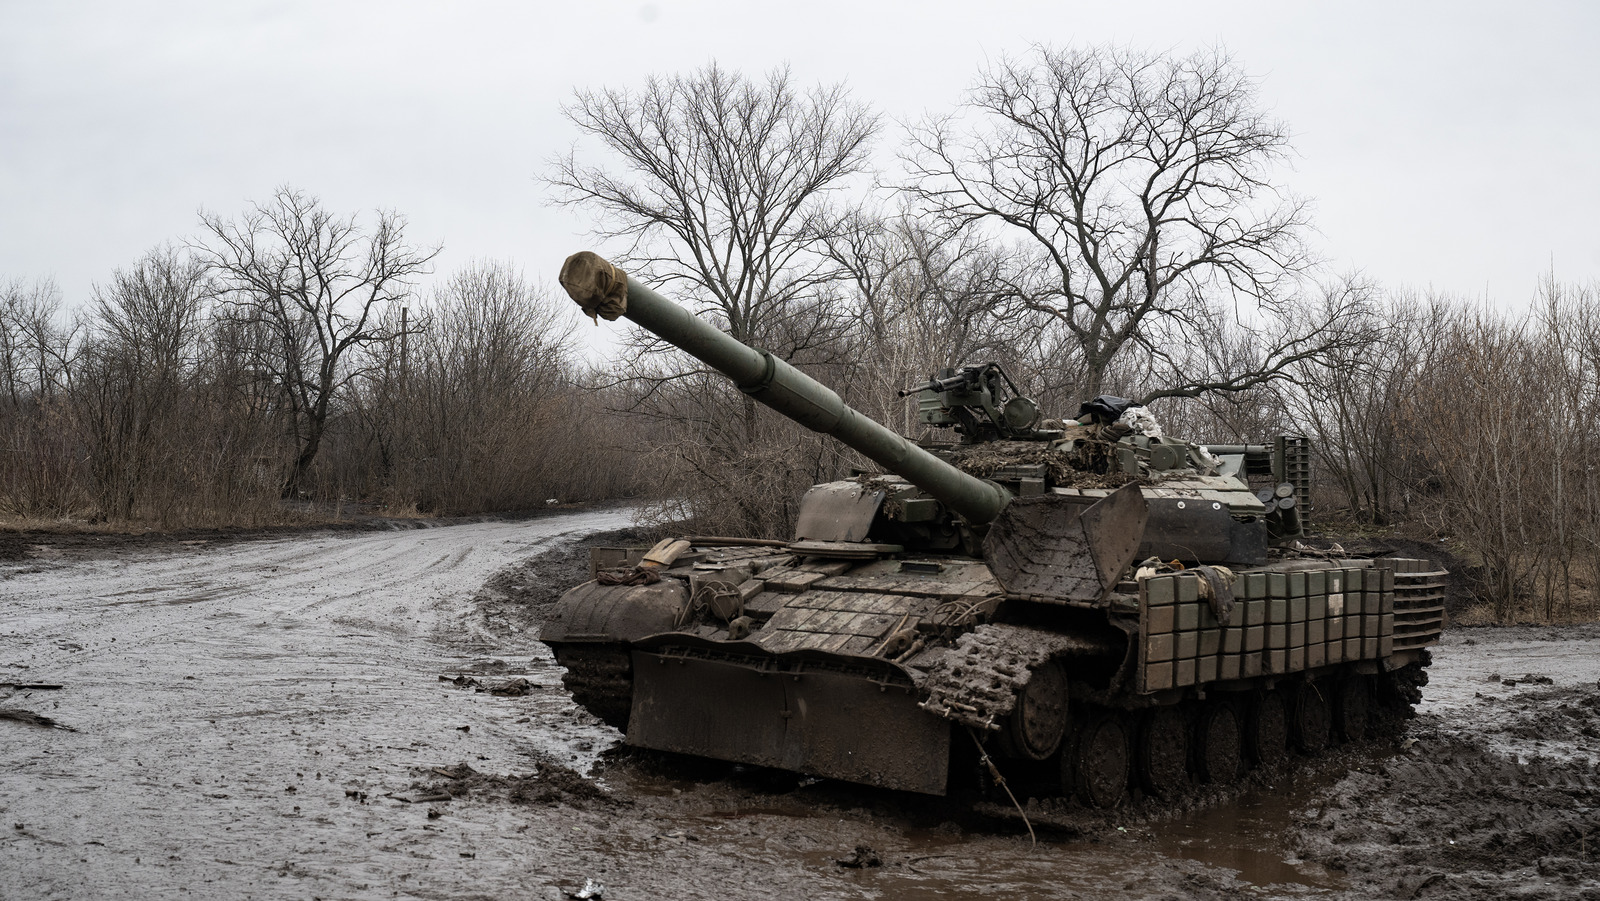 Russian Turtle Tanks: What Are They & Why Do They Look The Way They
Do?